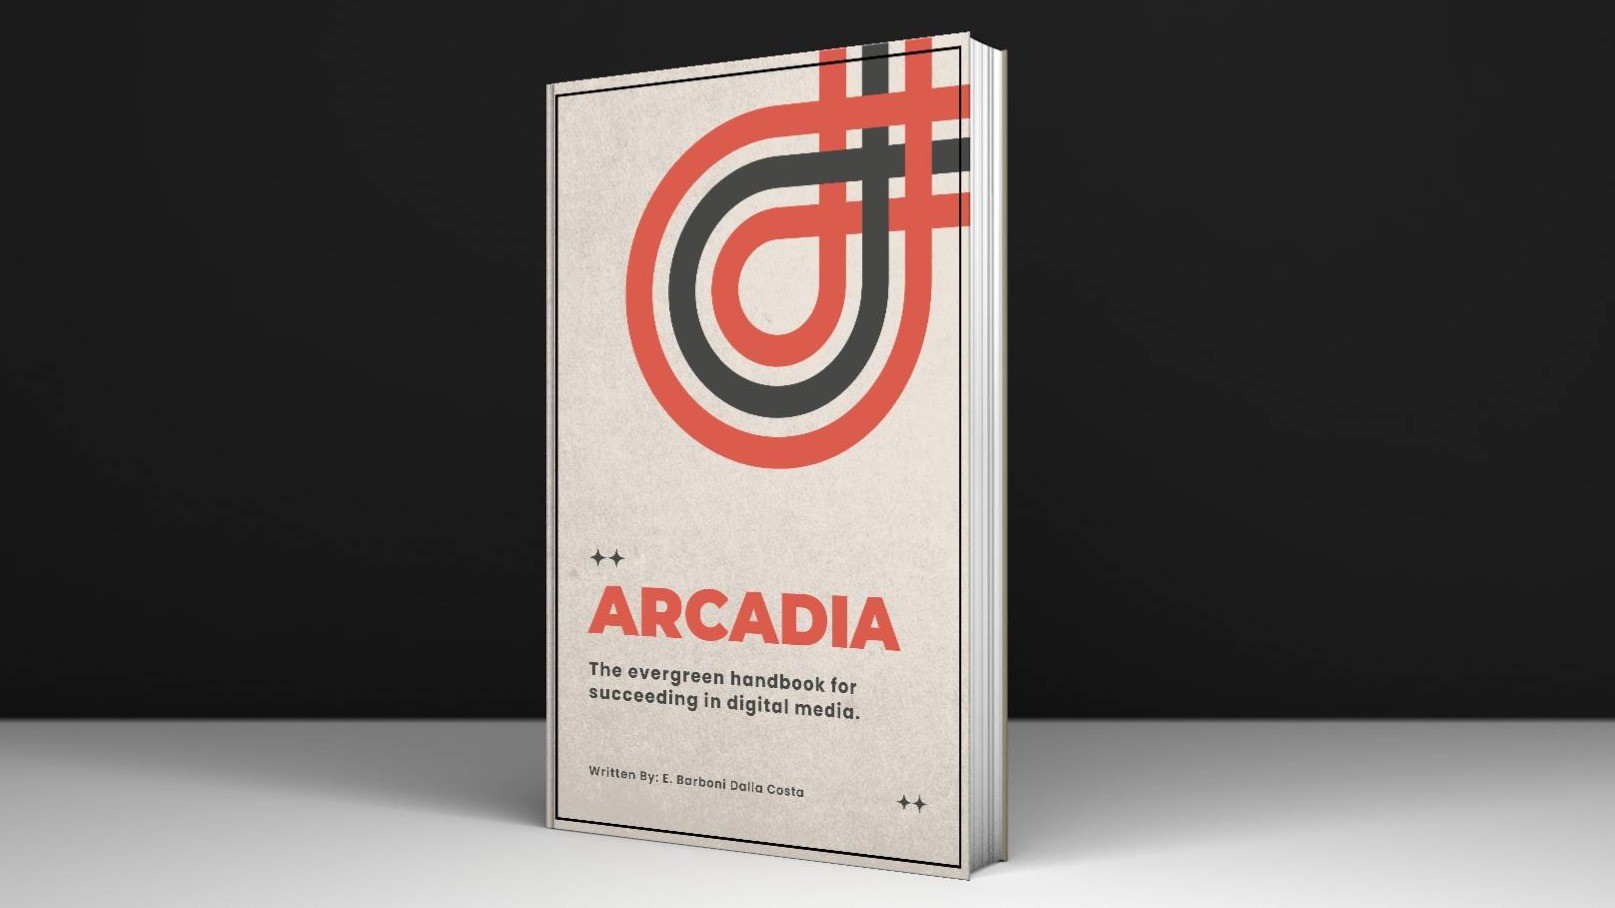 AppSumo Deal for Arcadia: The Last Online Communication eBook You'll Ever Buy